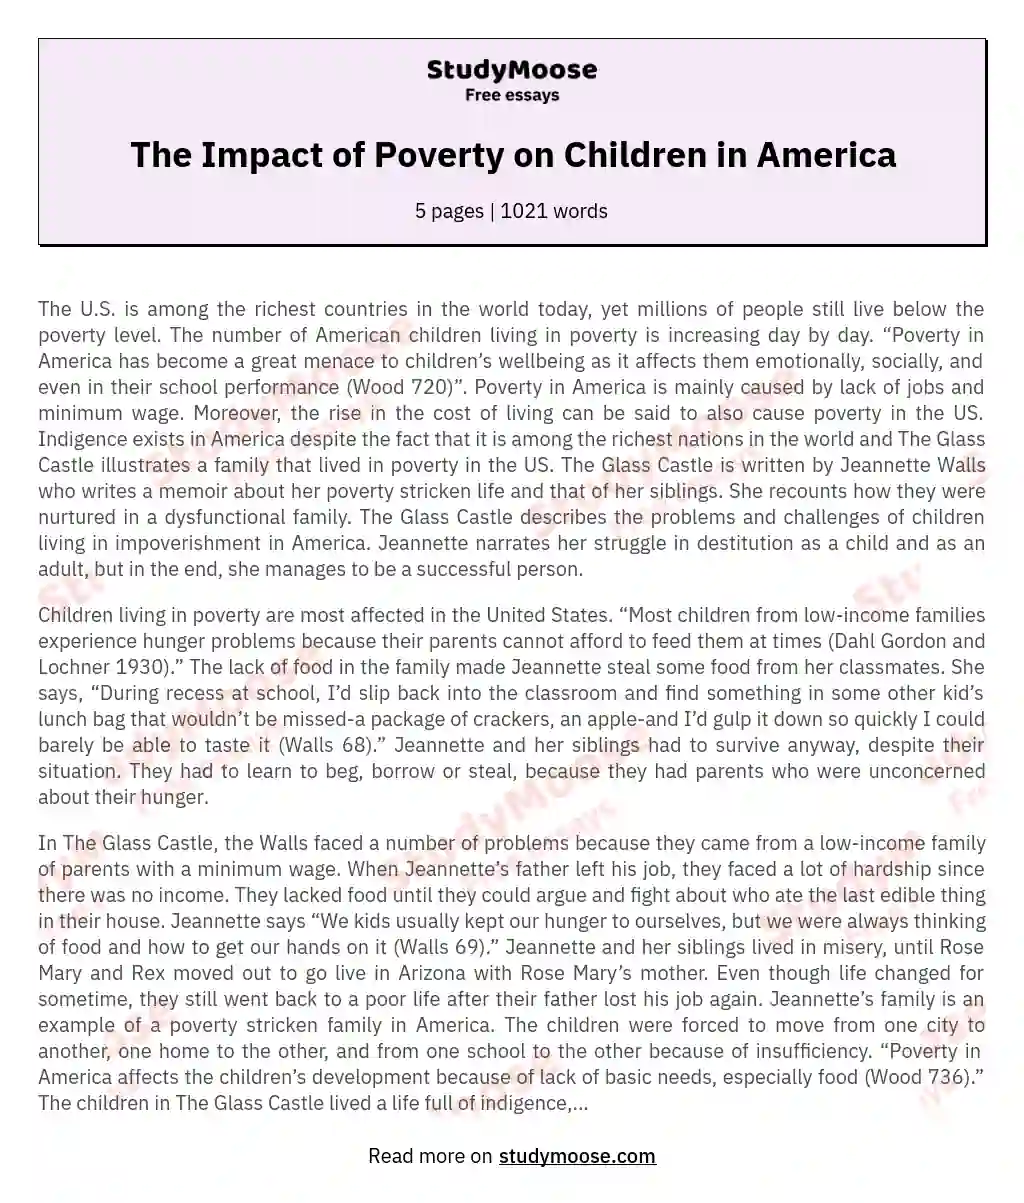 The Impact of Poverty on Children in America essay